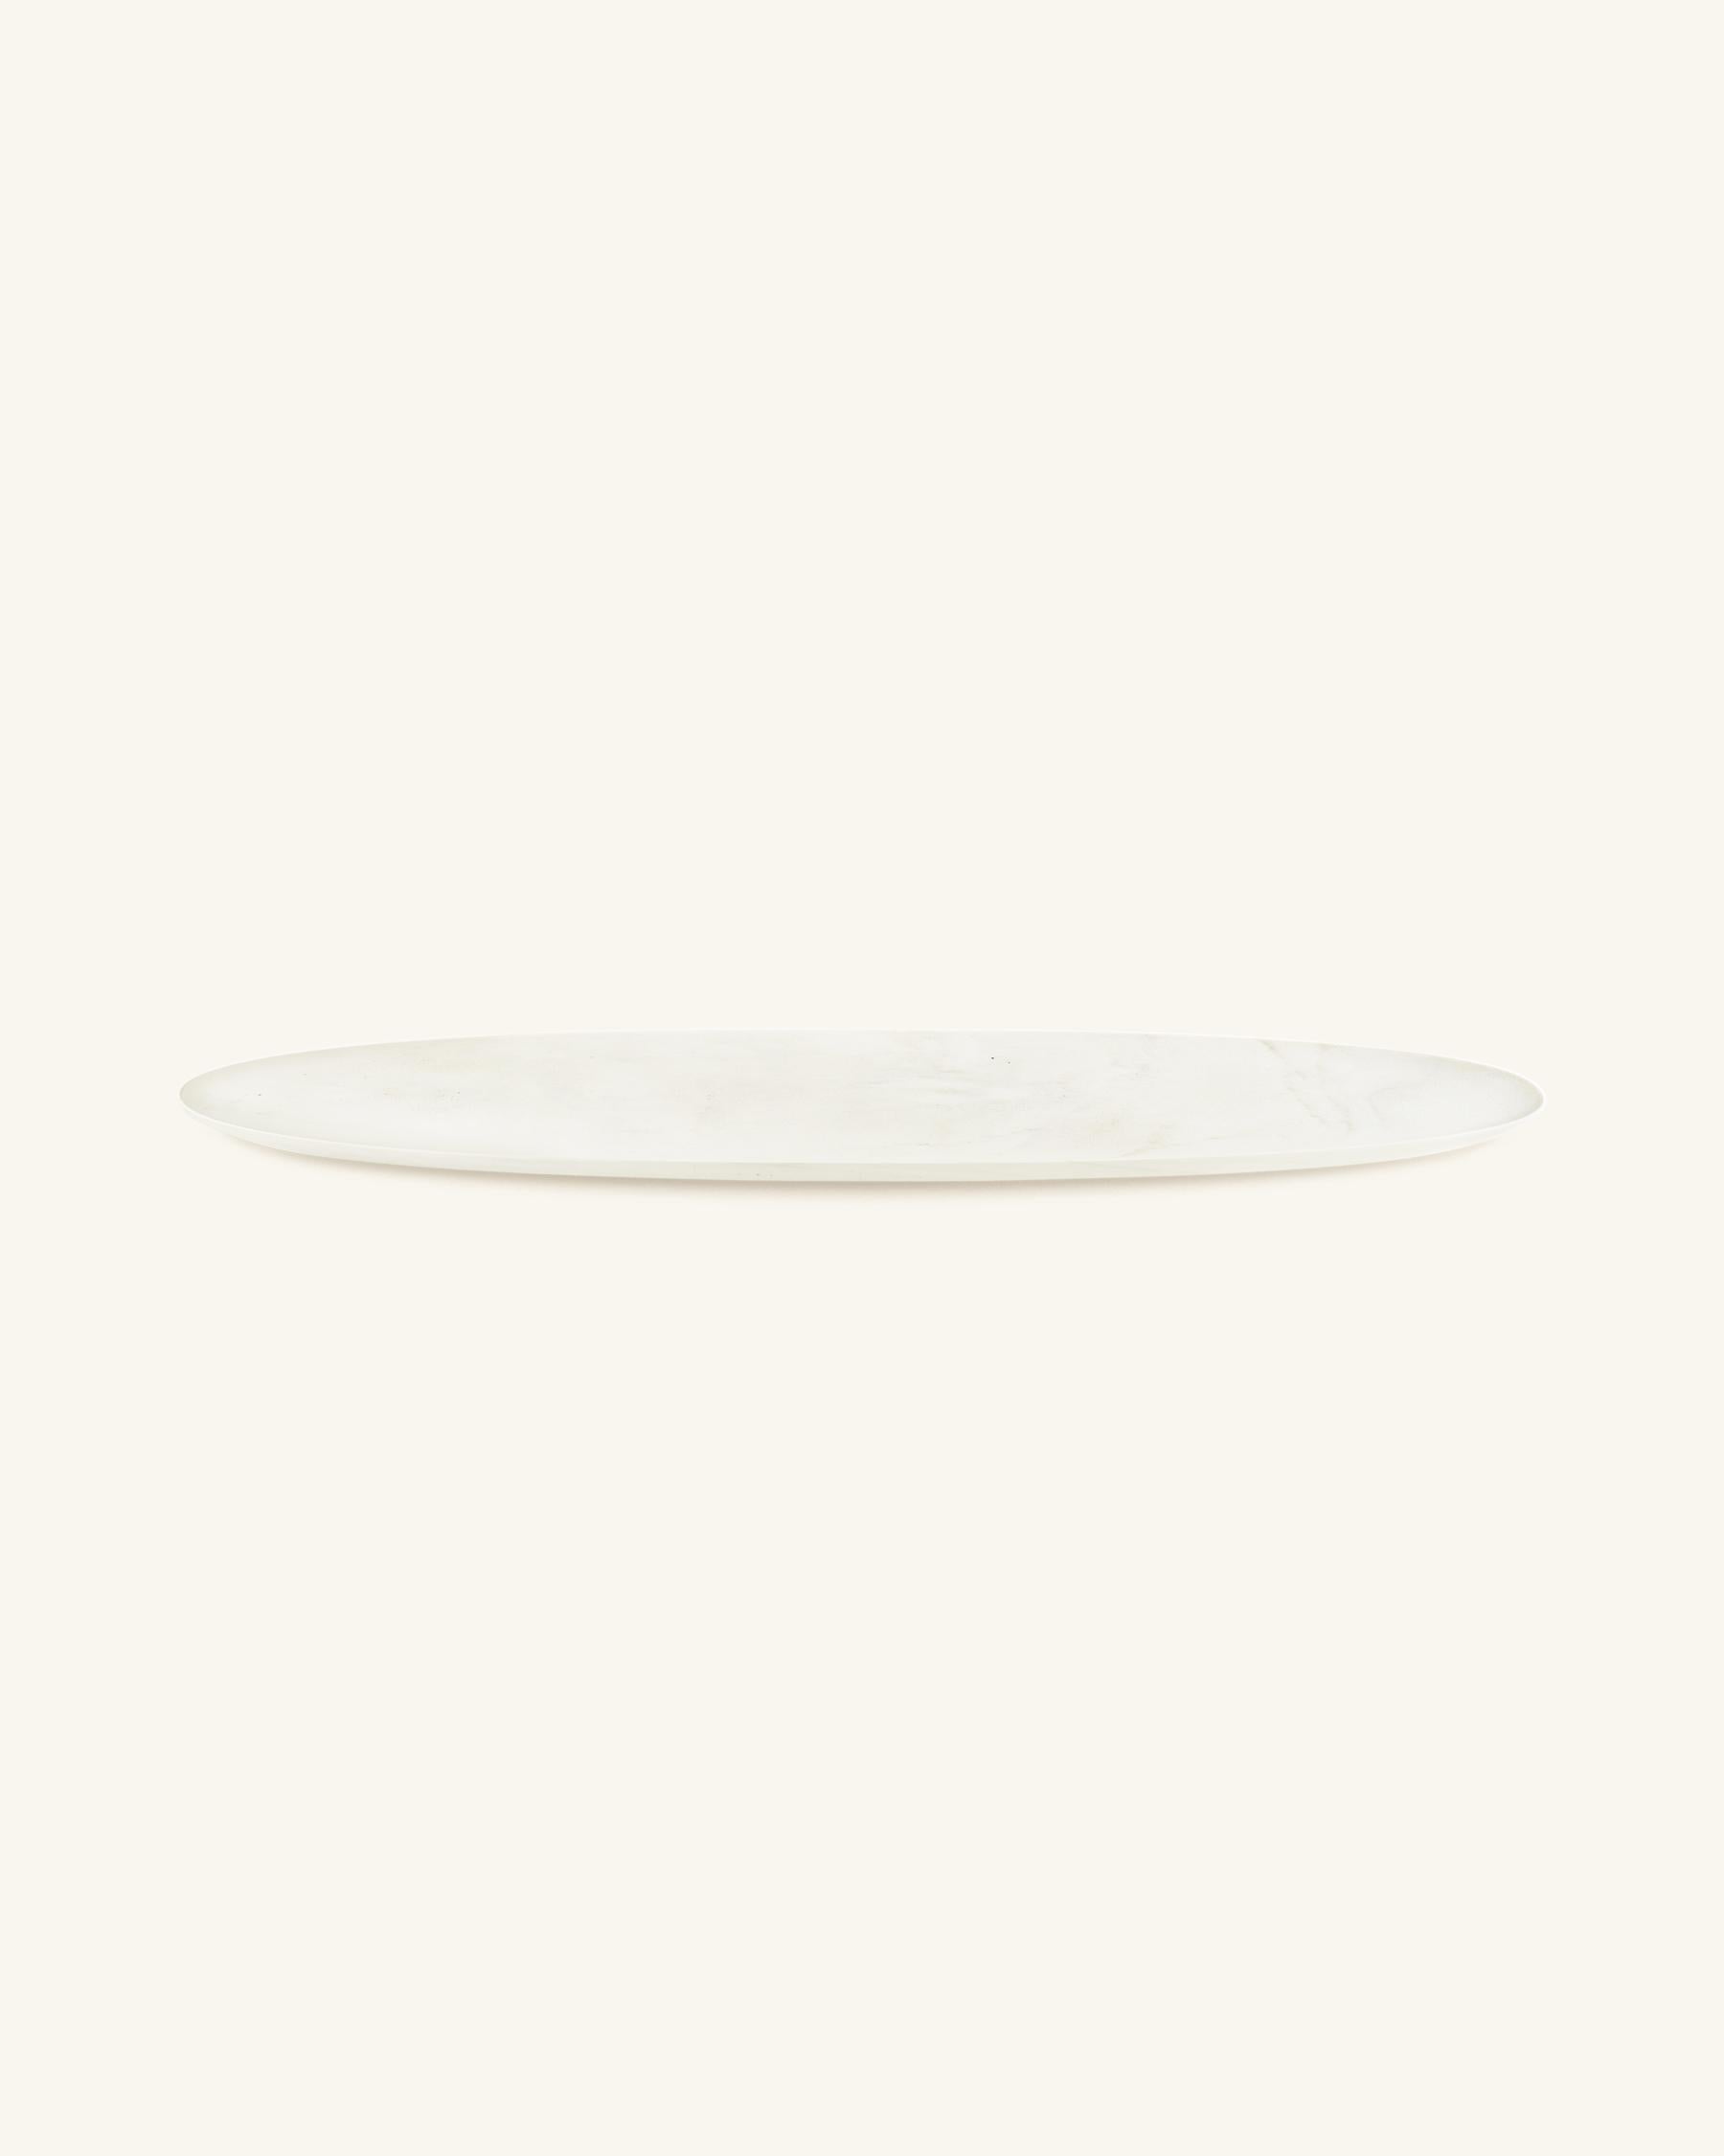 Sepia tray by Homefolks
Dimensions: D 31.5 x W 115 x H 3.5 cm 
Materials: Cremo Delicato marble.

A sculptural tray with spectacular dimensions, Sepia is inspired by cuttlebones scattered on the beach at low tide. Bold and minimal, its